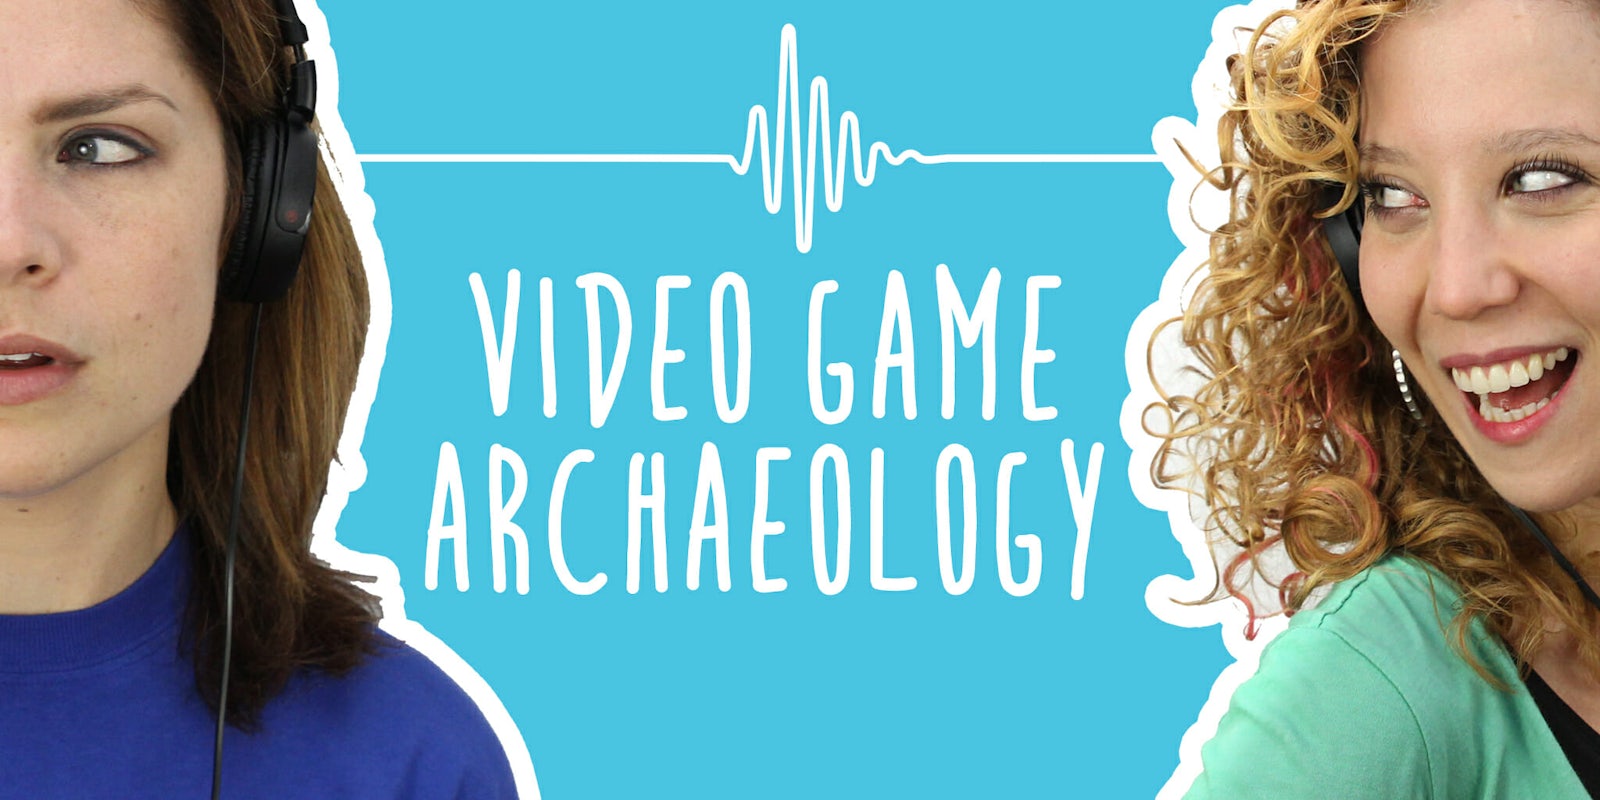 2 Girls 1 Podcast video game archaeology